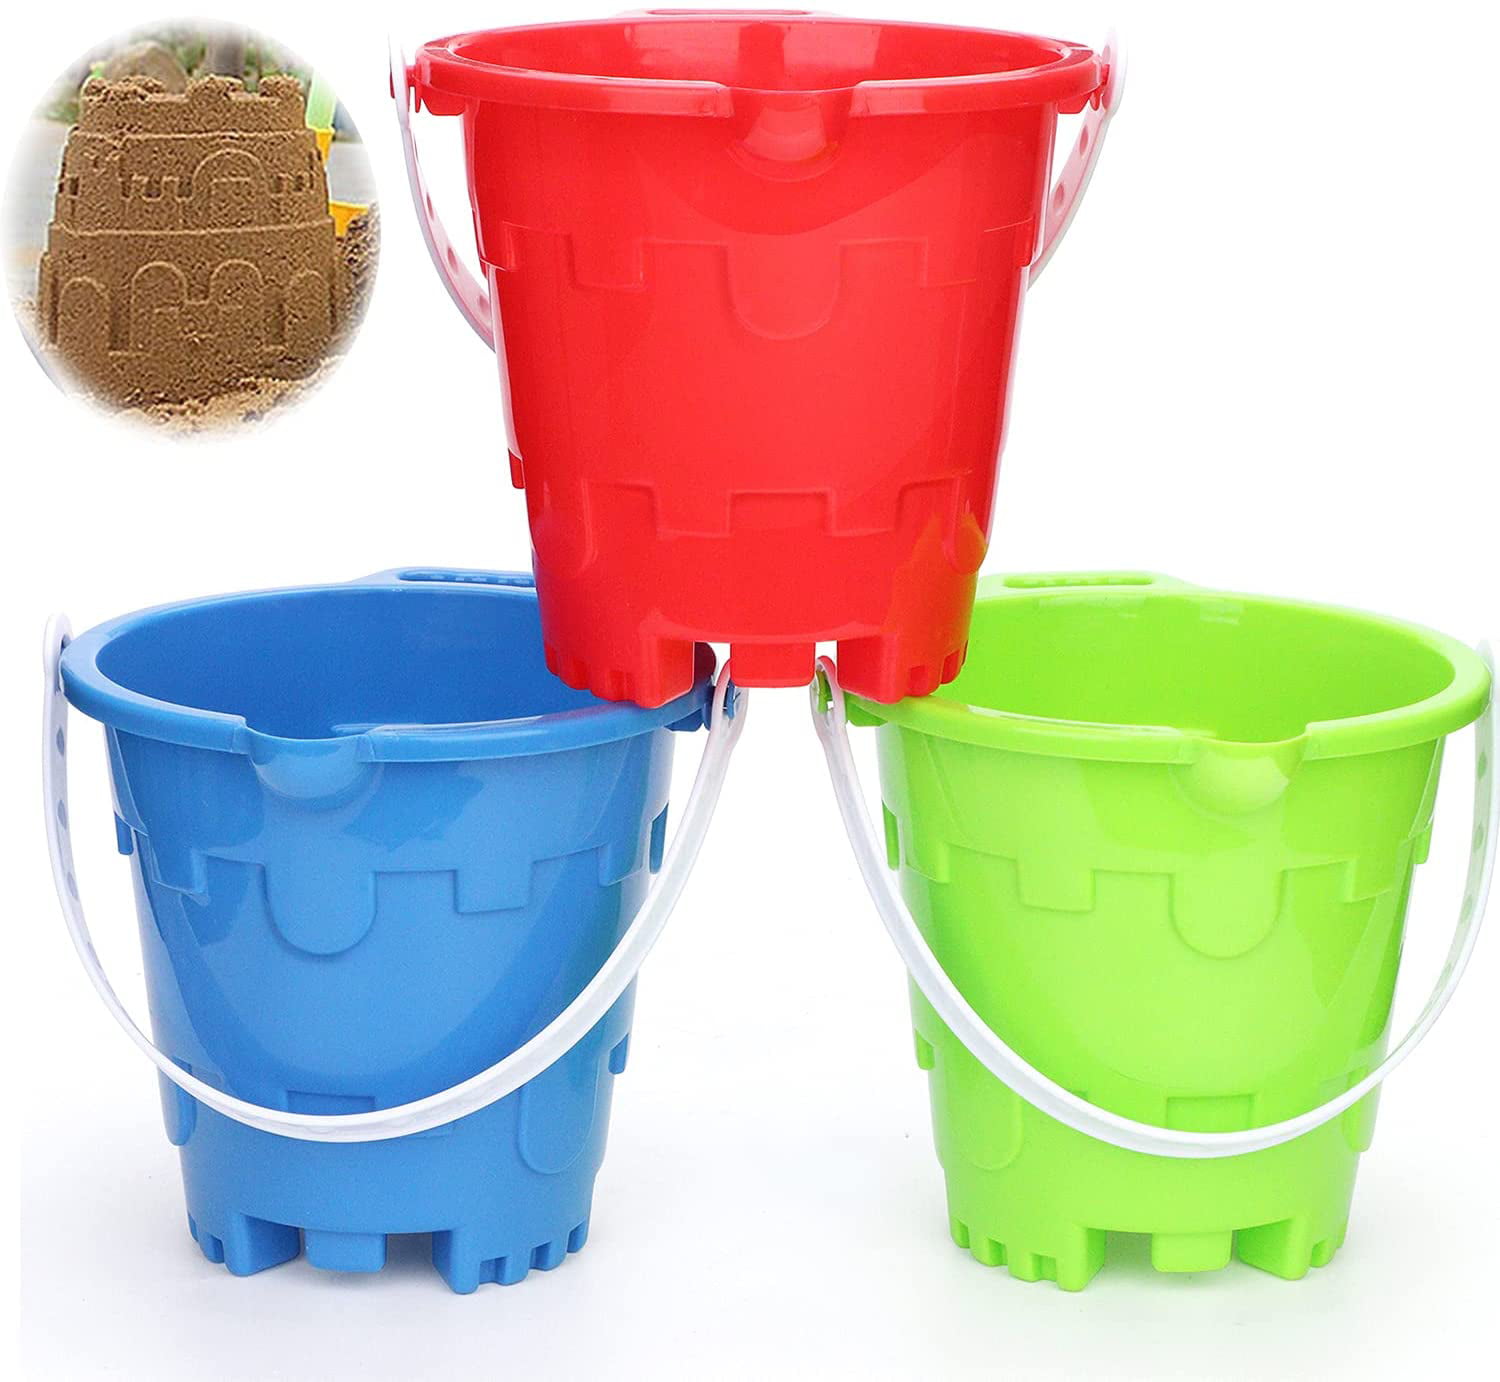 3 Pack Castle Model Beach Sand Buckets 7 Large Snow Castle Maker Pails Water Pool Gardening Bath Toy ABS Durable Thick Plastic Gift Bucket Set For Camping Traveling Cleaning Summer Beach Pool Party 